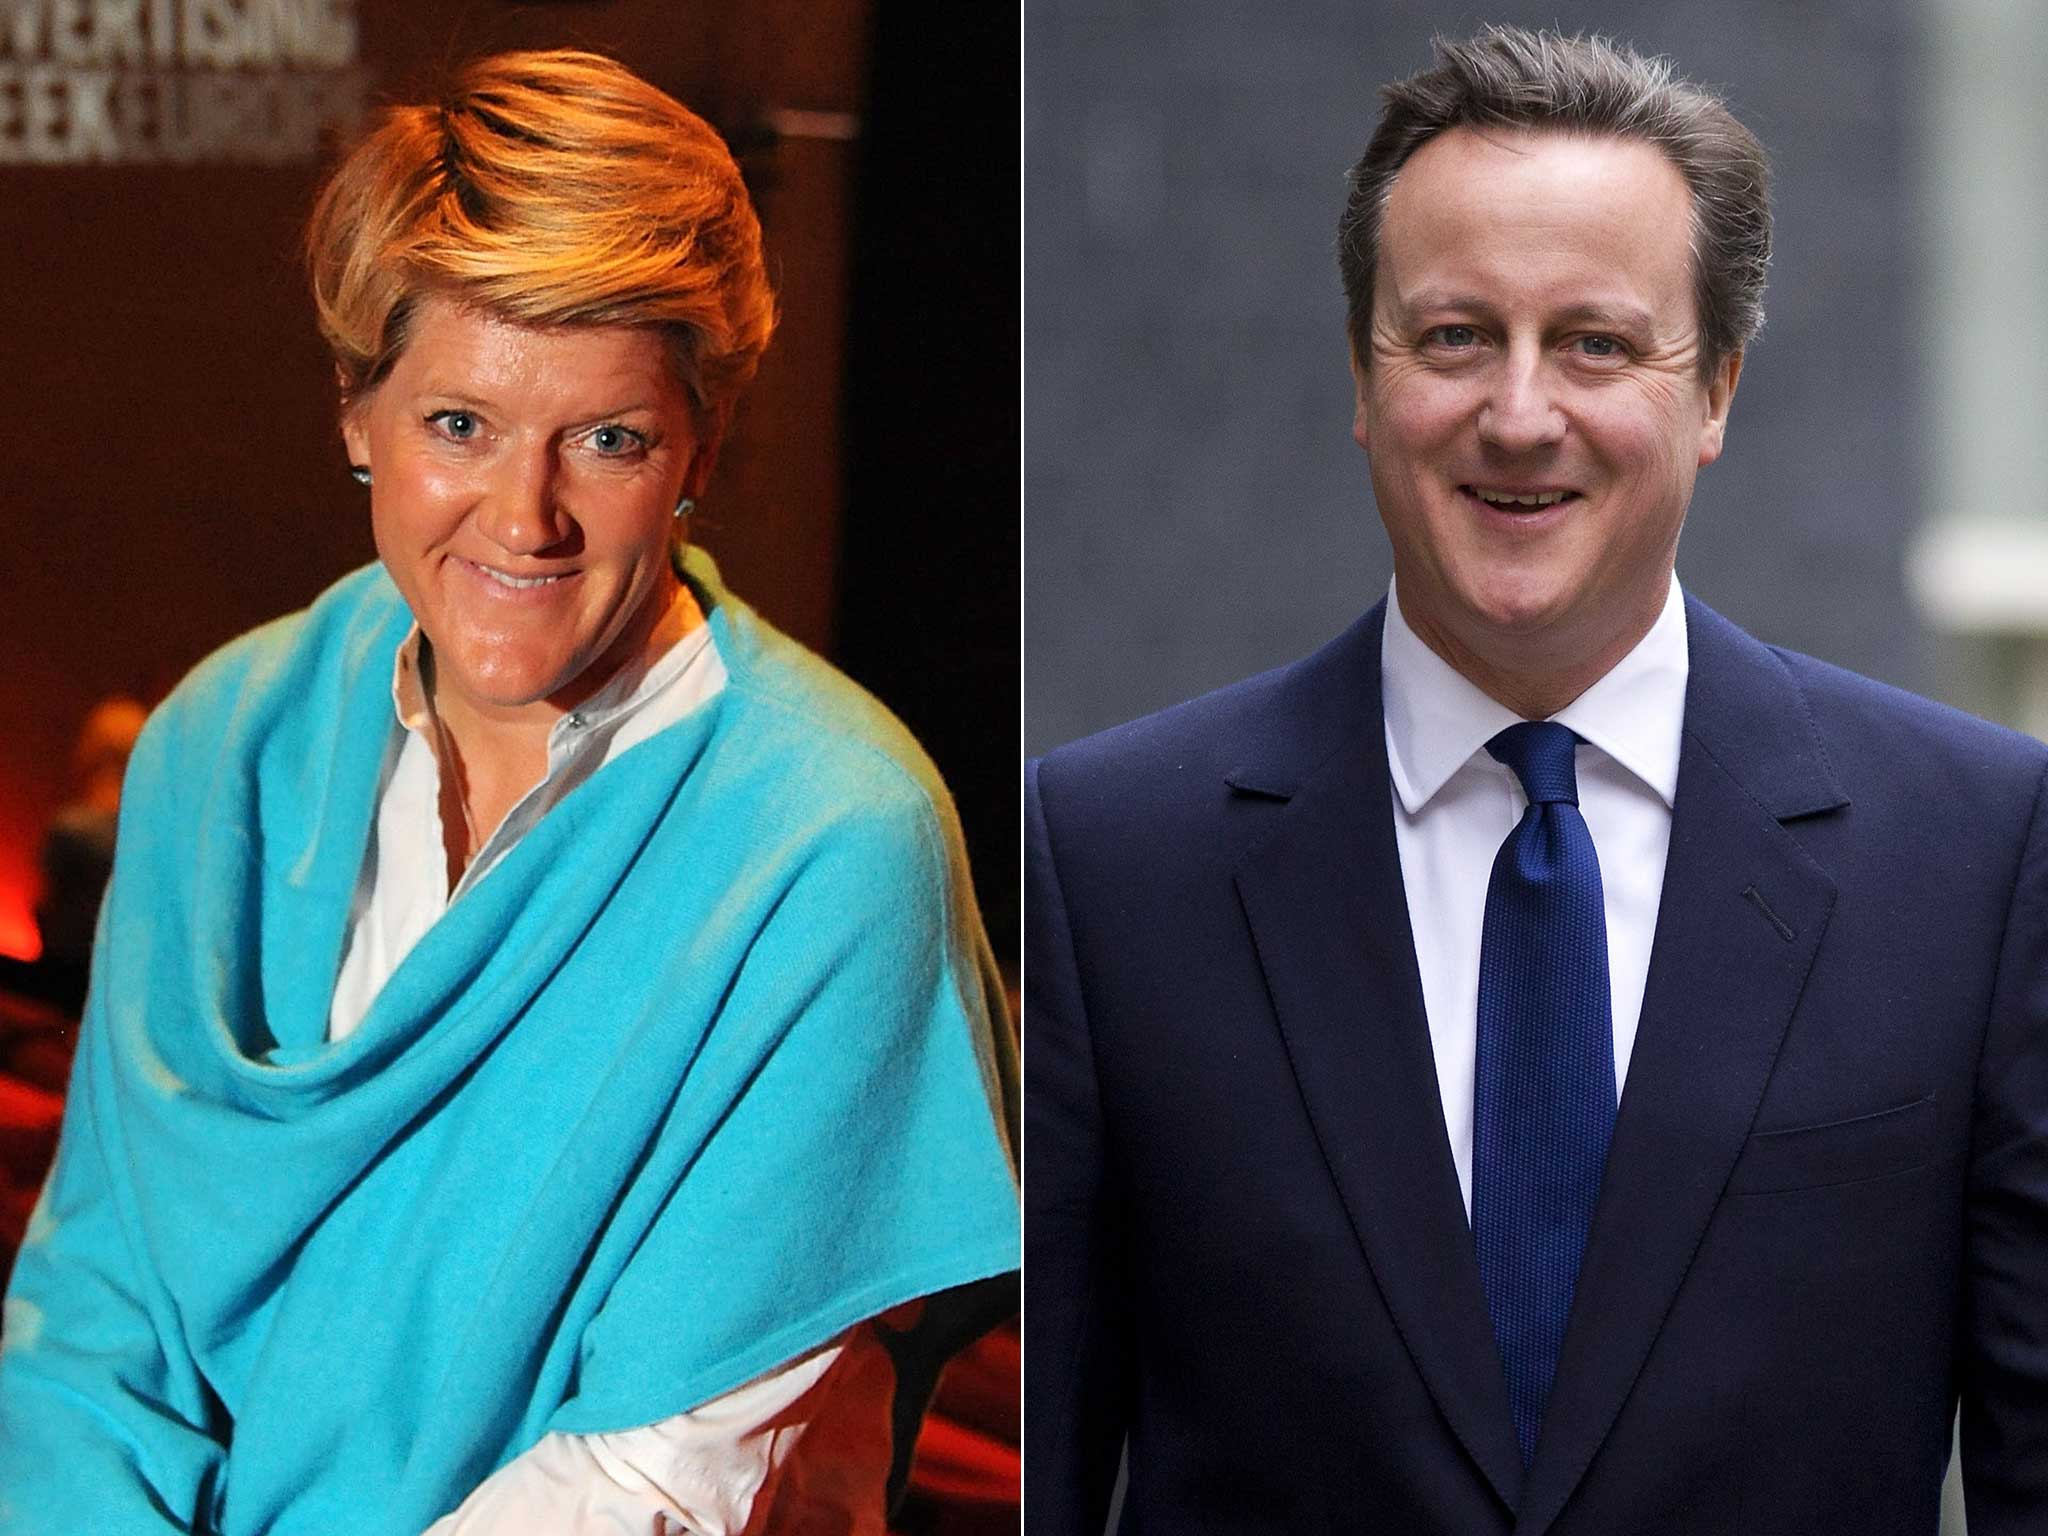 Clare Balding is apparently the LGBT figure the PM most admires